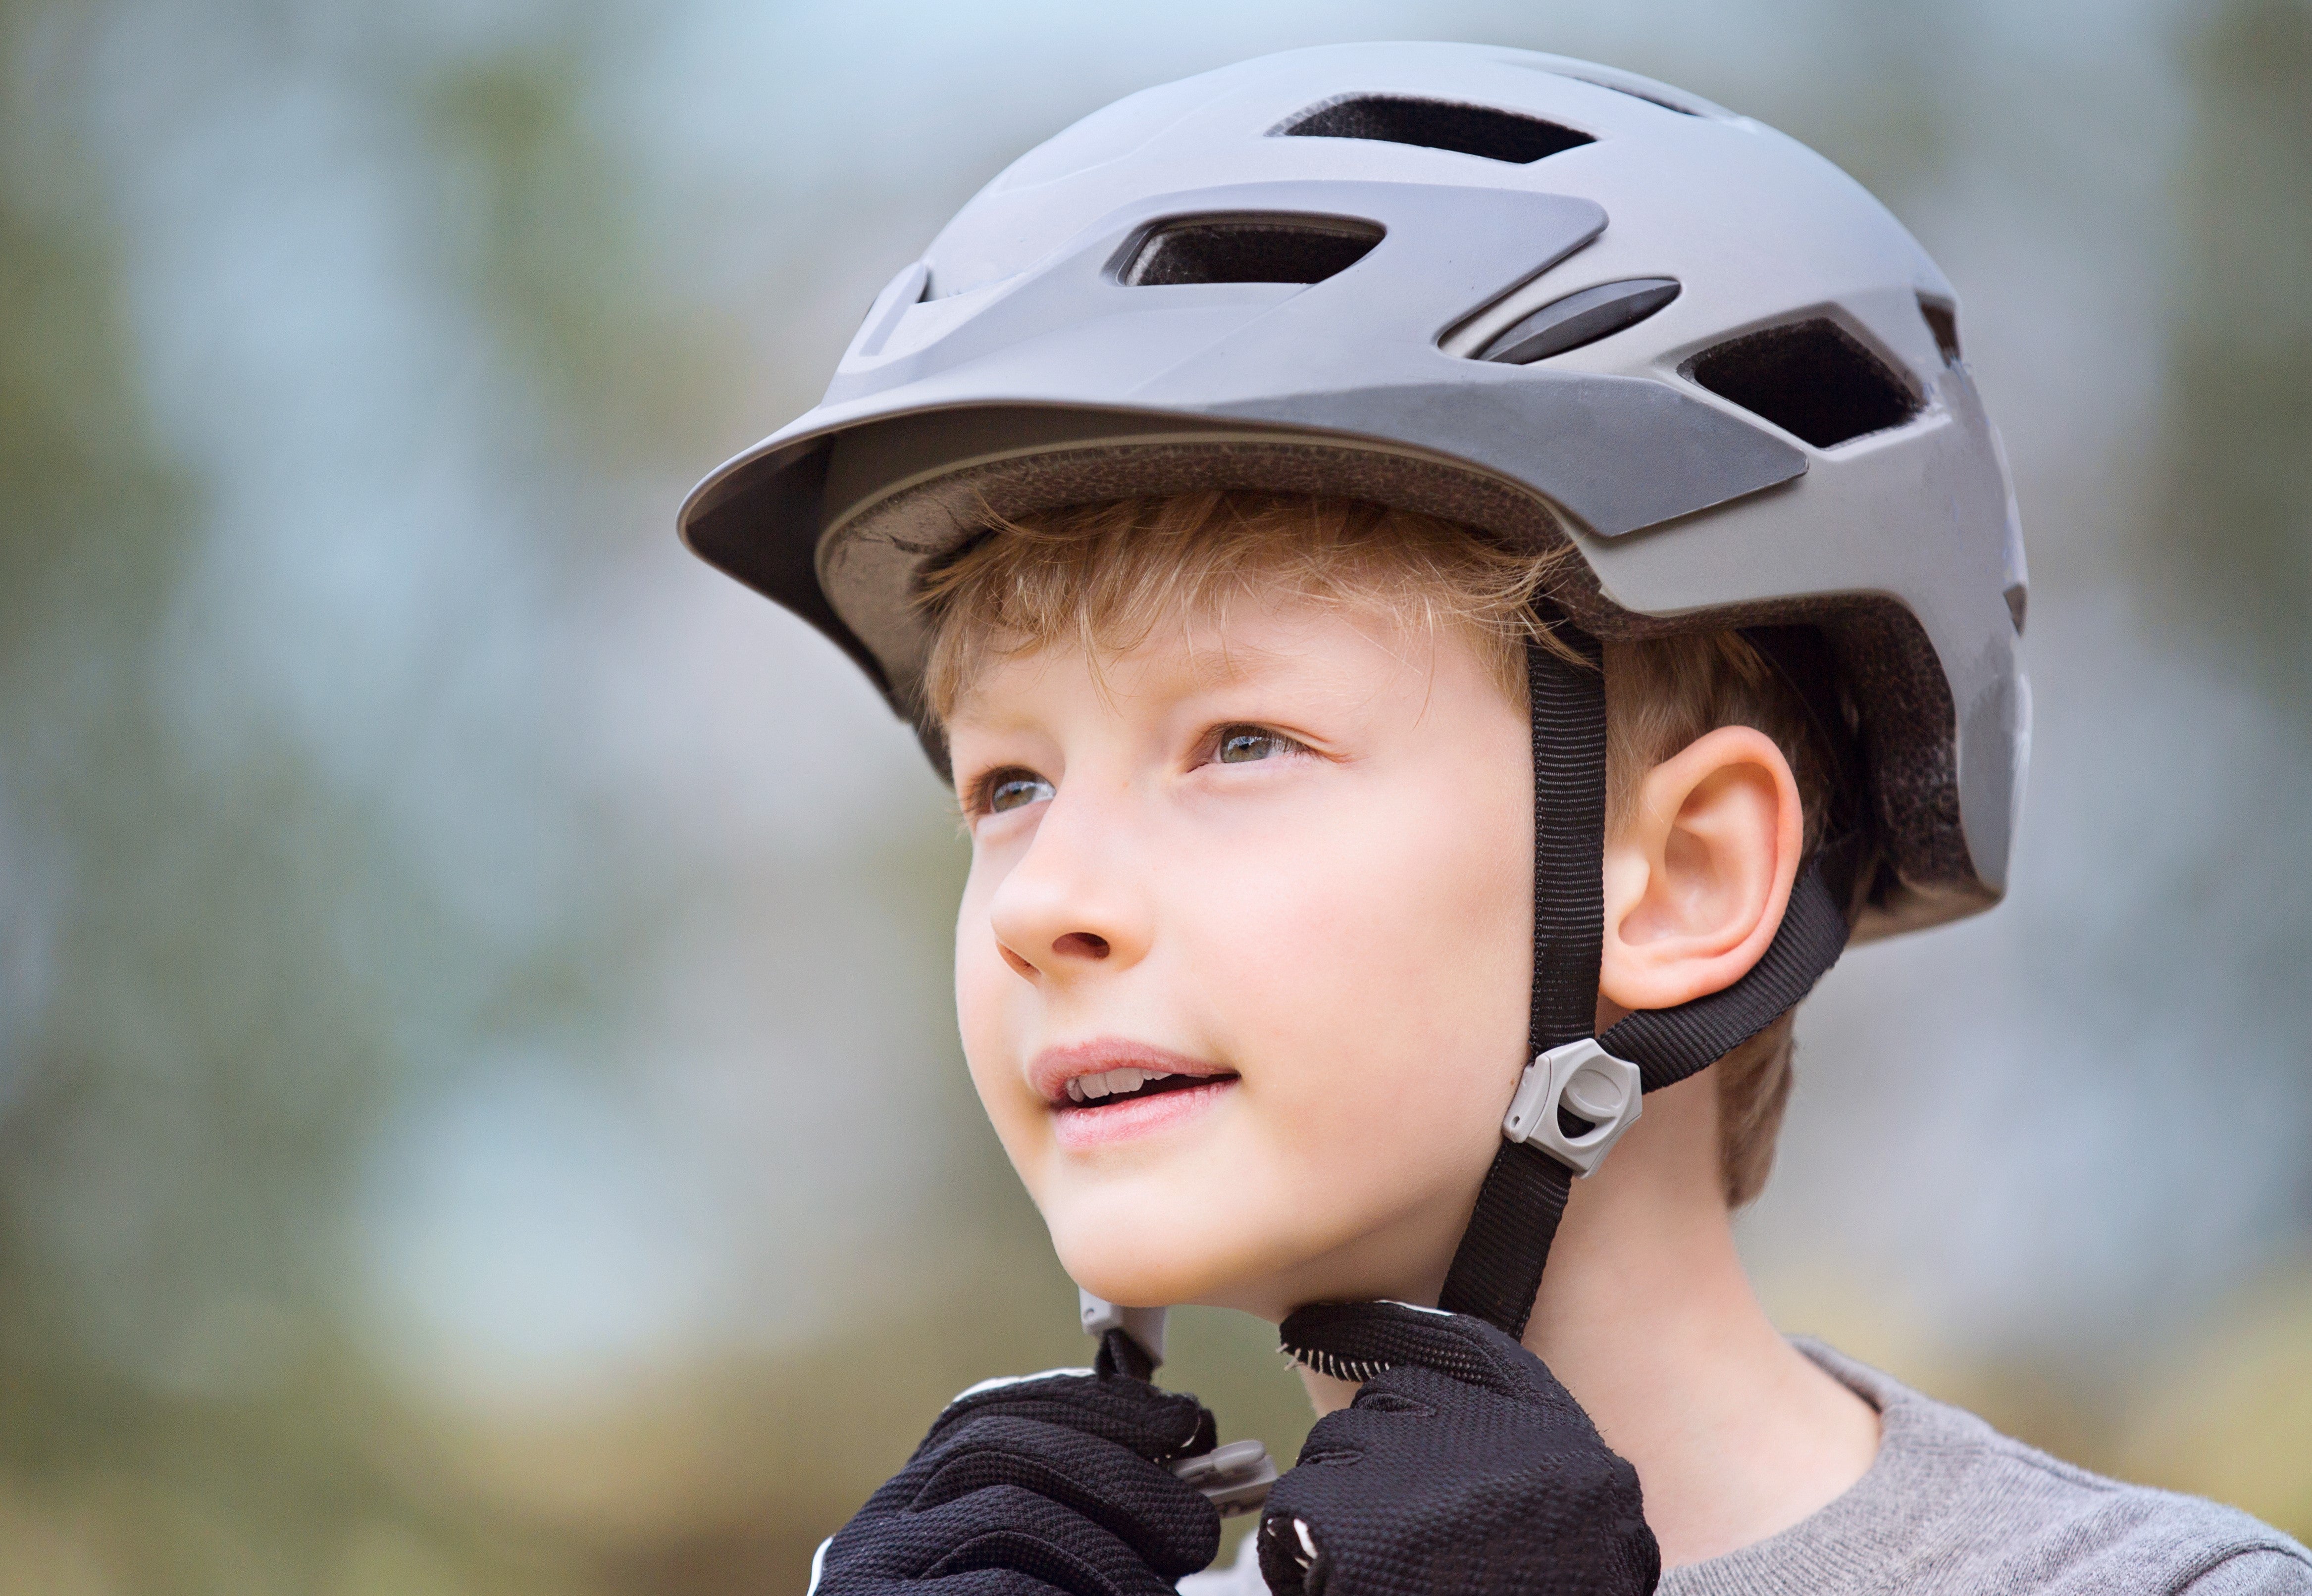 How To Safely Fit Kids Helmets